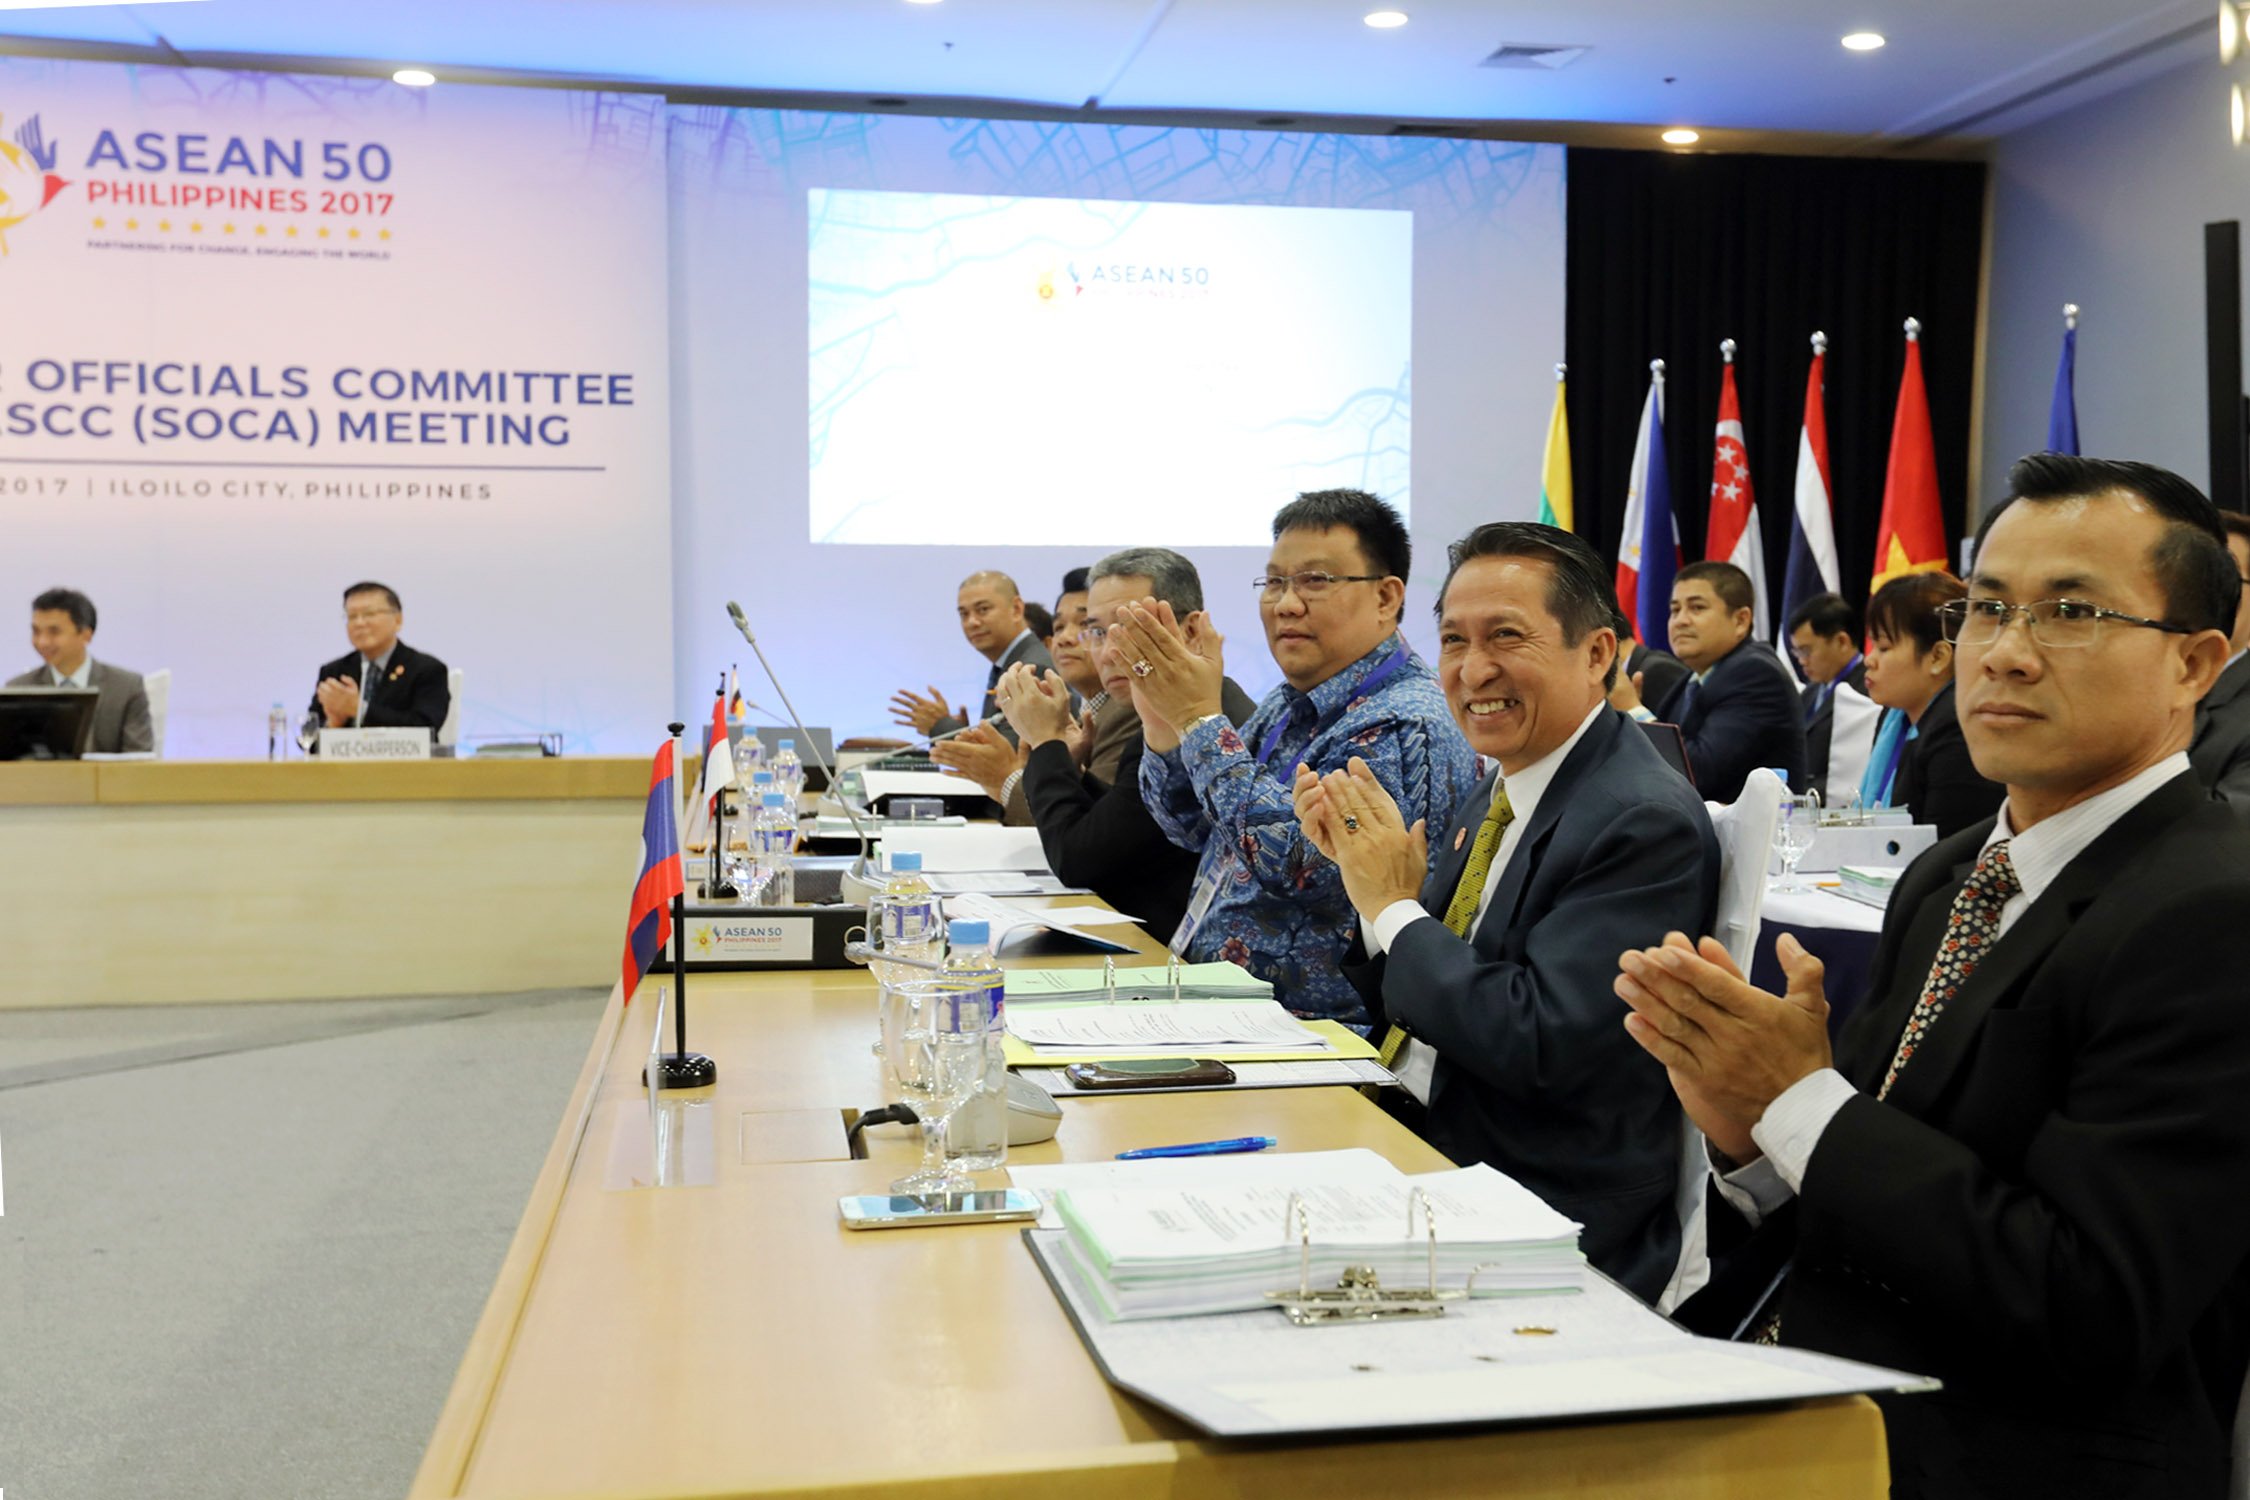 Senior Officials Committee for the ASEAN Council Meeting kicks off in Iloilo